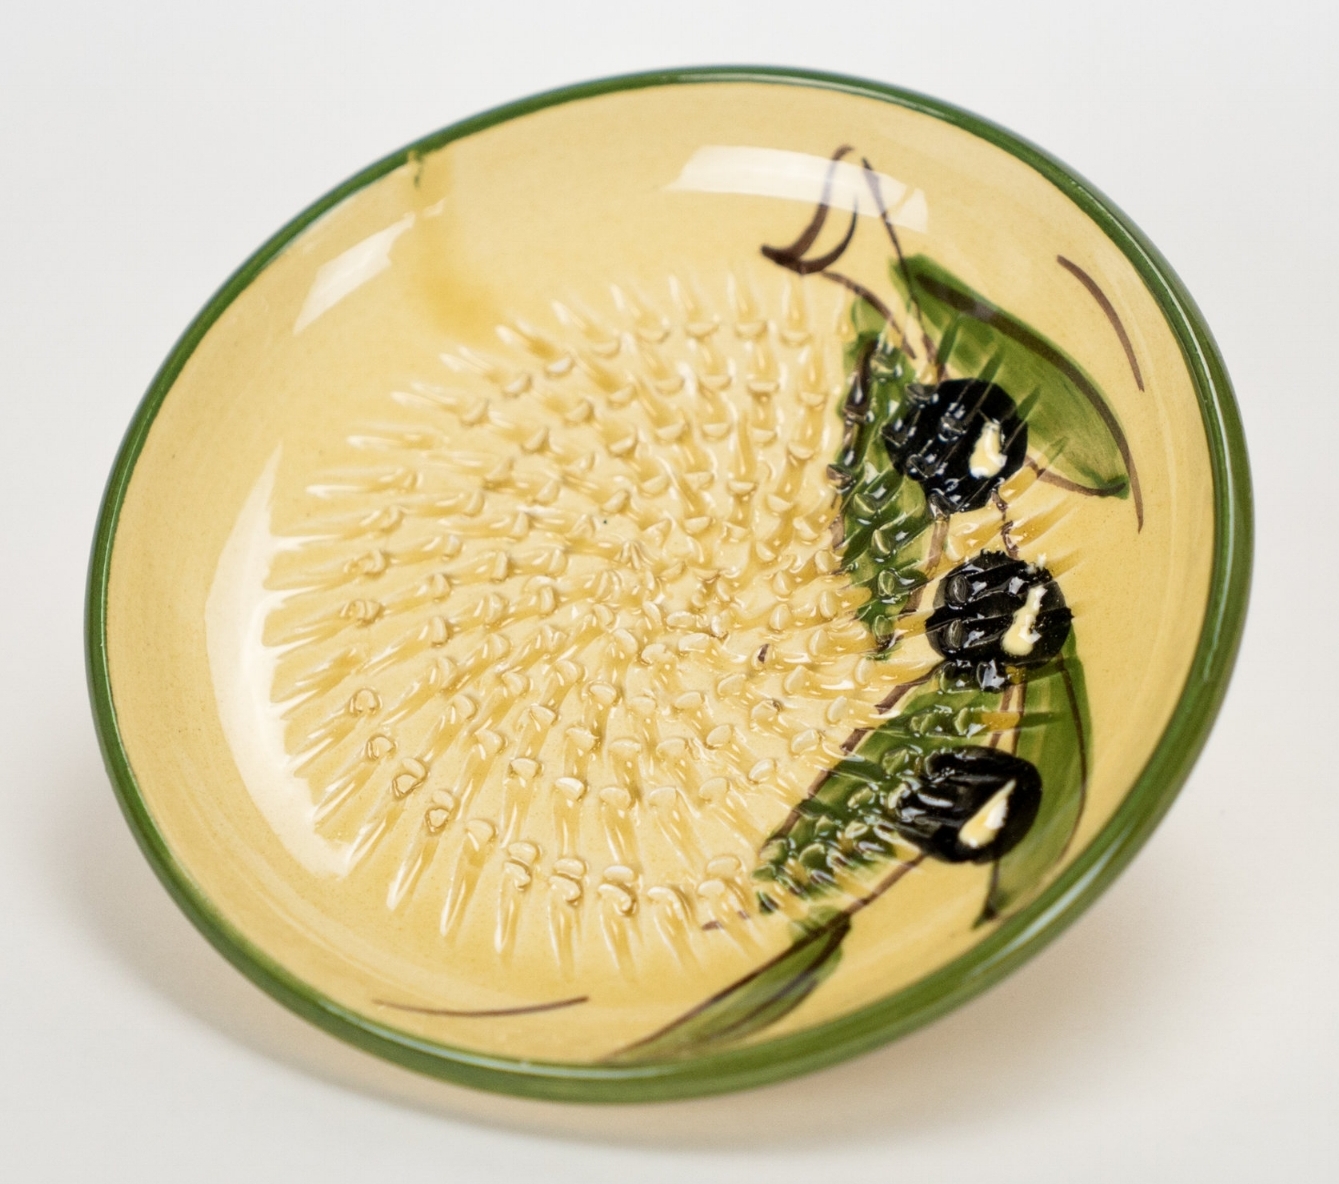 Garlic Grater and Dipping Plate